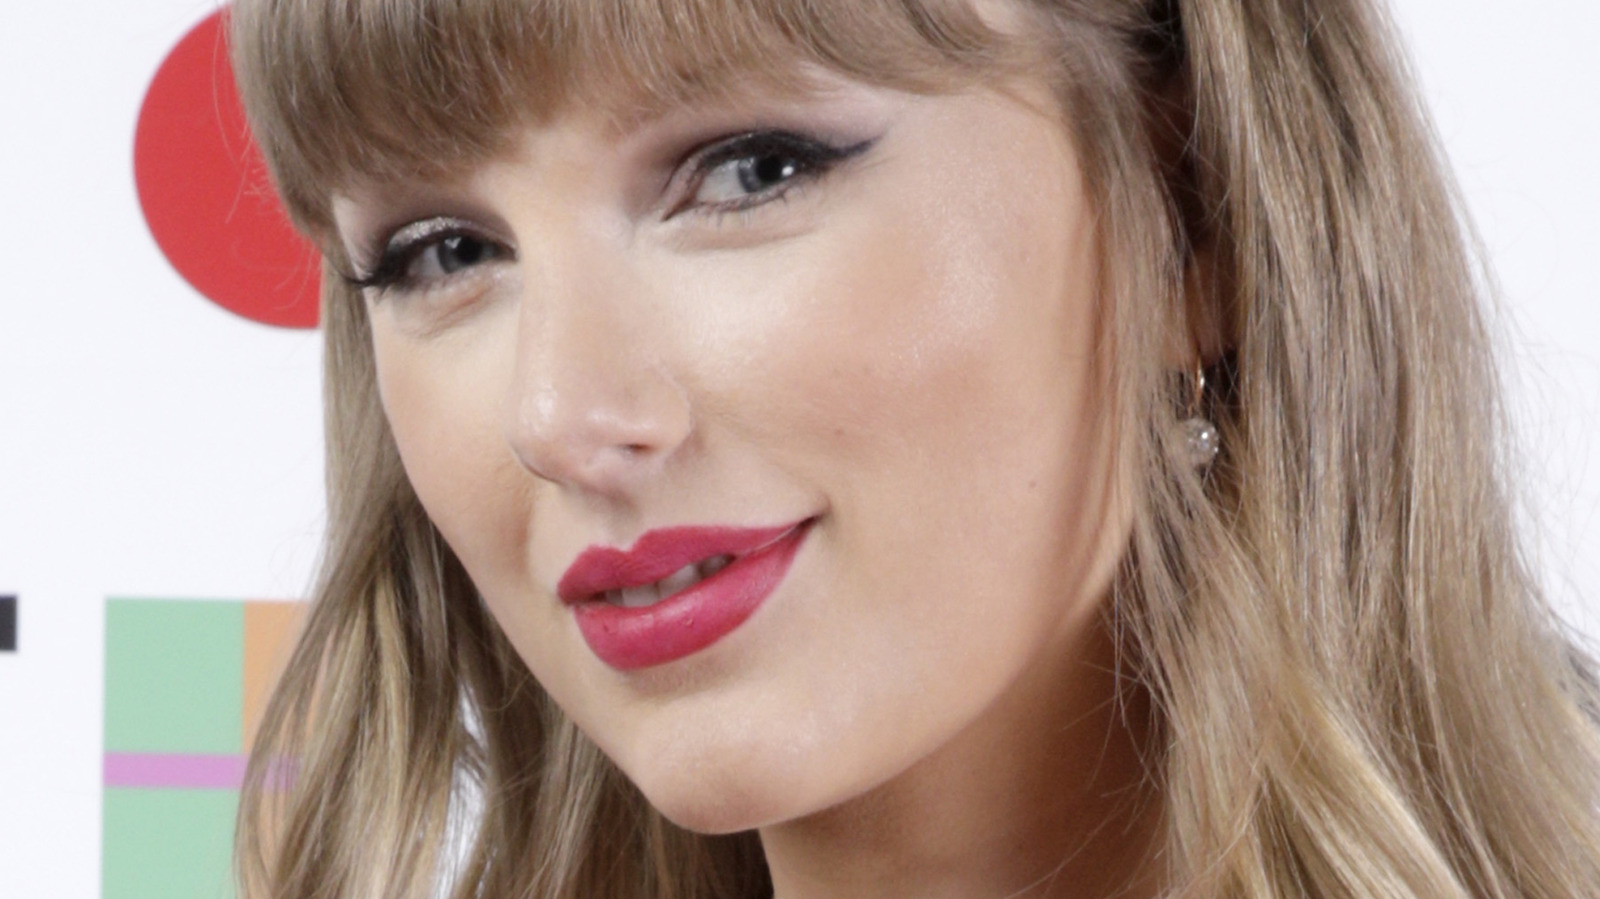 Photos: Five Reasons to Think Taylor Swift Is John Mayer's “Paper